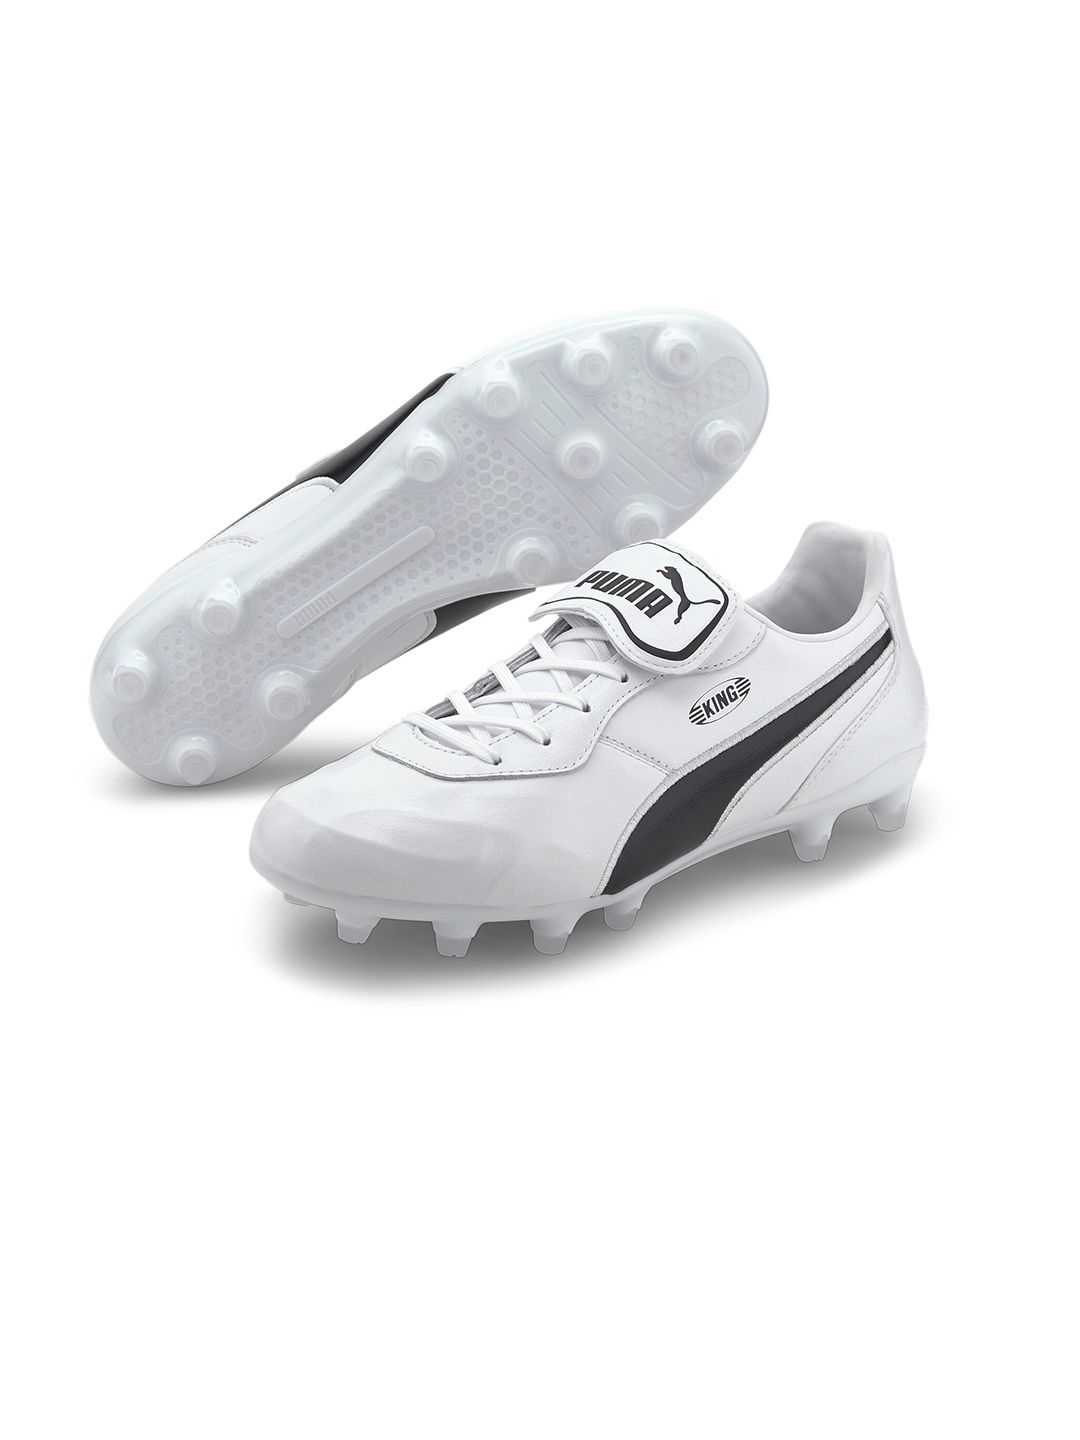 Puma Unisex White KING Top FG Football Boots Price in India